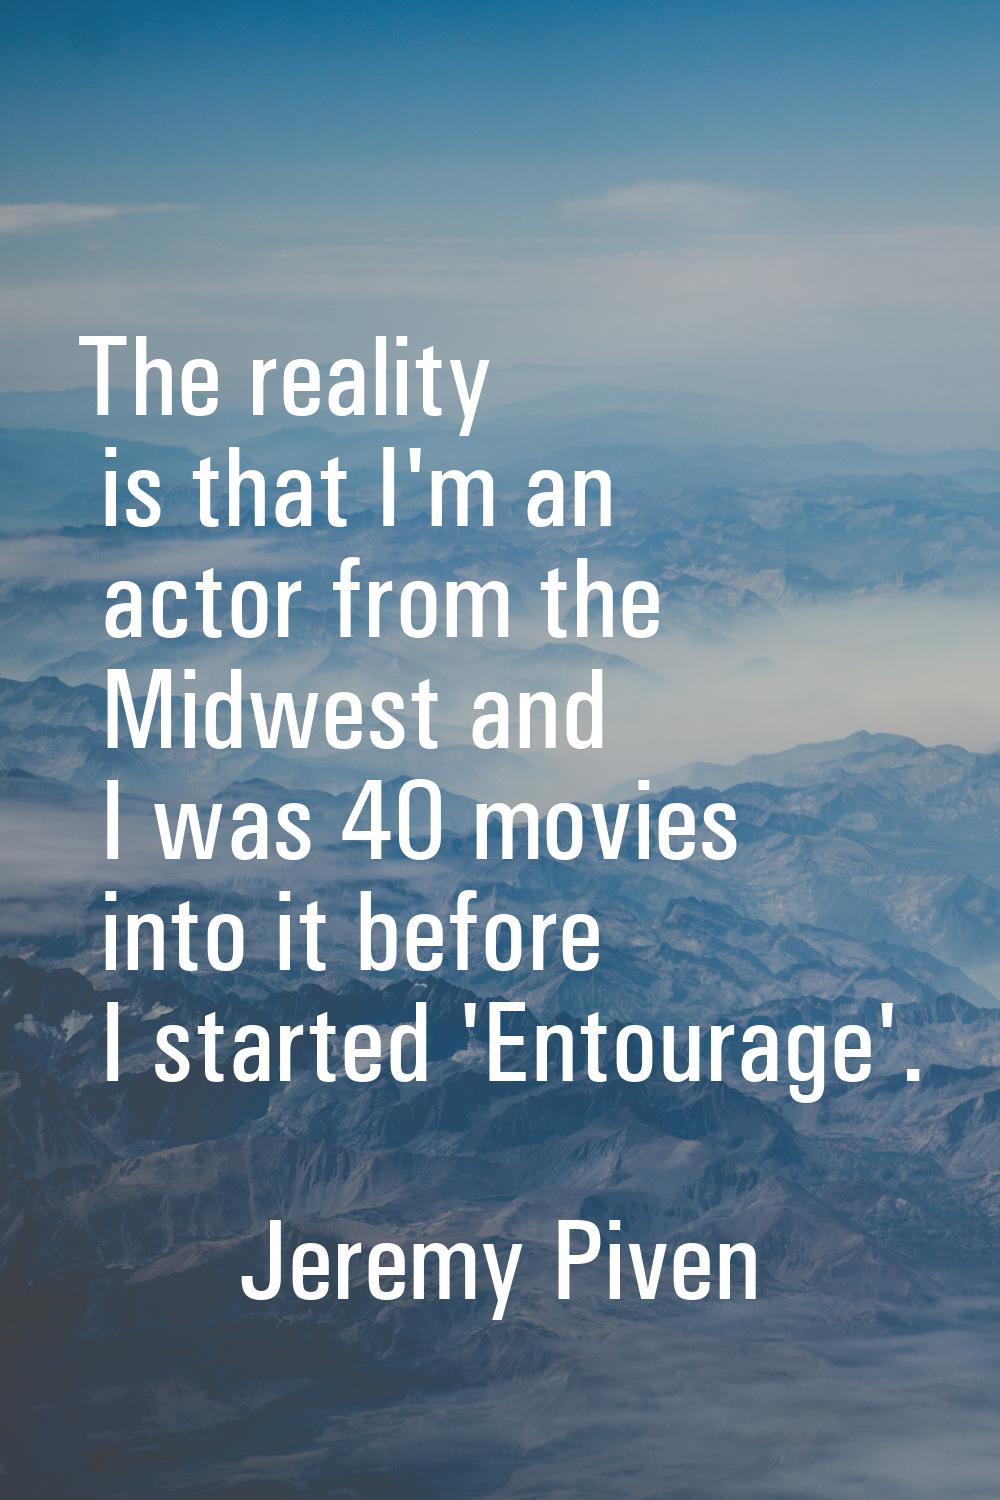 The reality is that I'm an actor from the Midwest and I was 40 movies into it before I started 'Ent